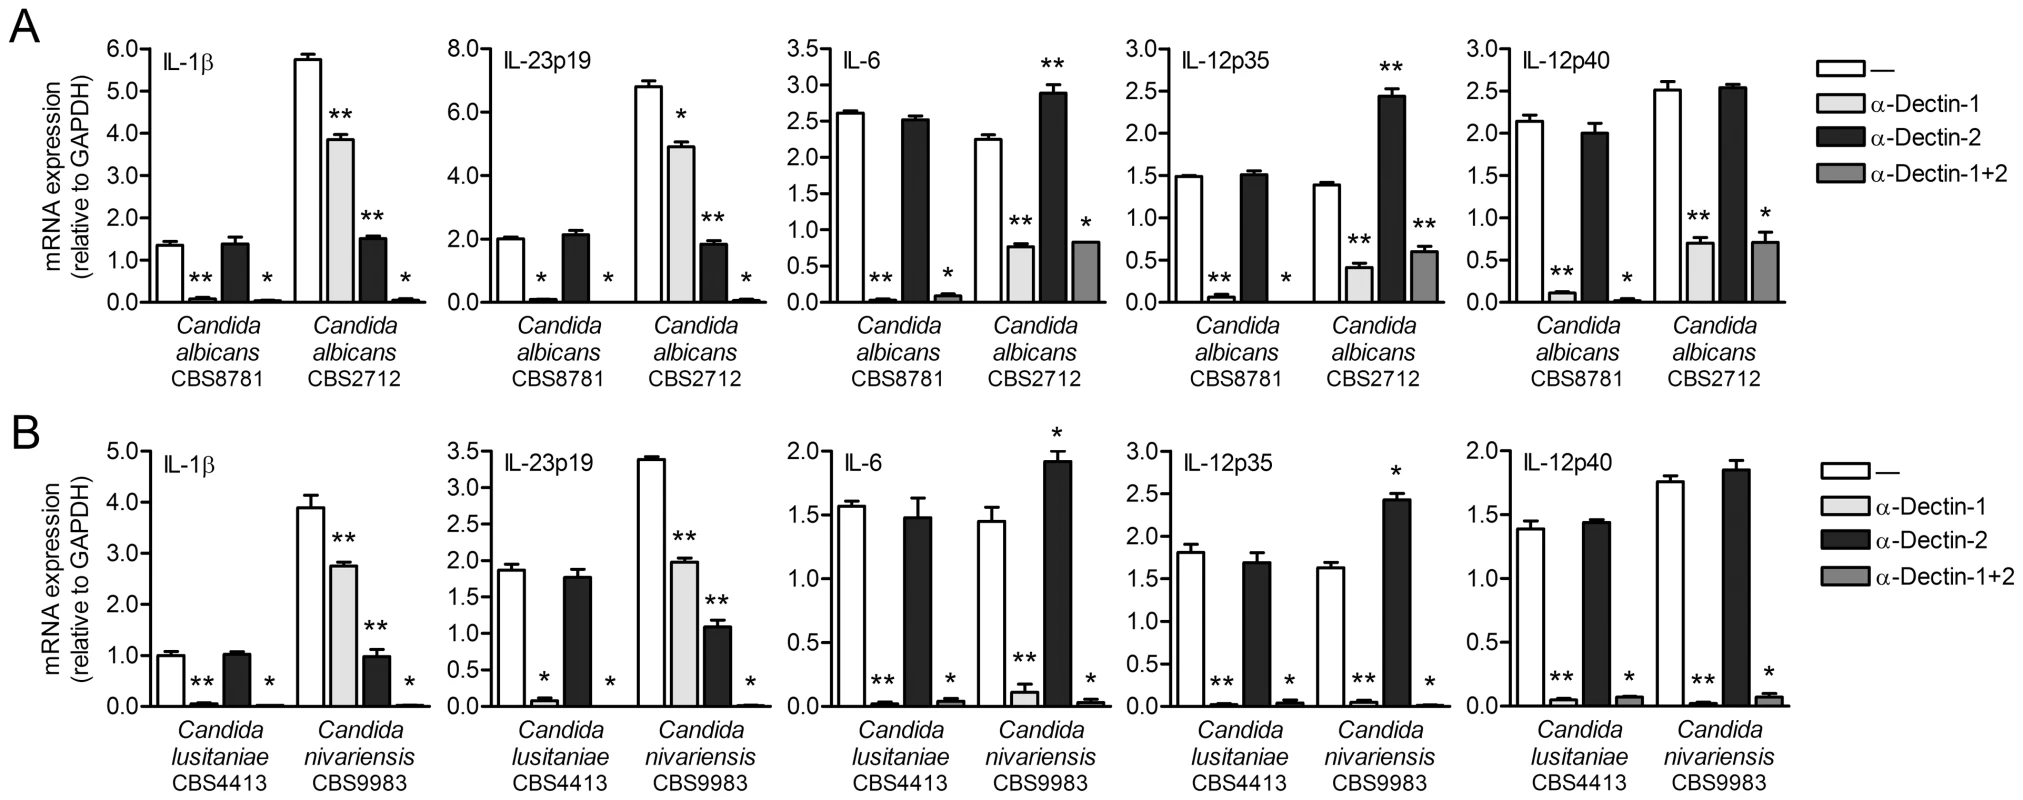 Dectin-1 and dectin-2 contribute to <i>Candida</i> spp.-induced cytokine expression.